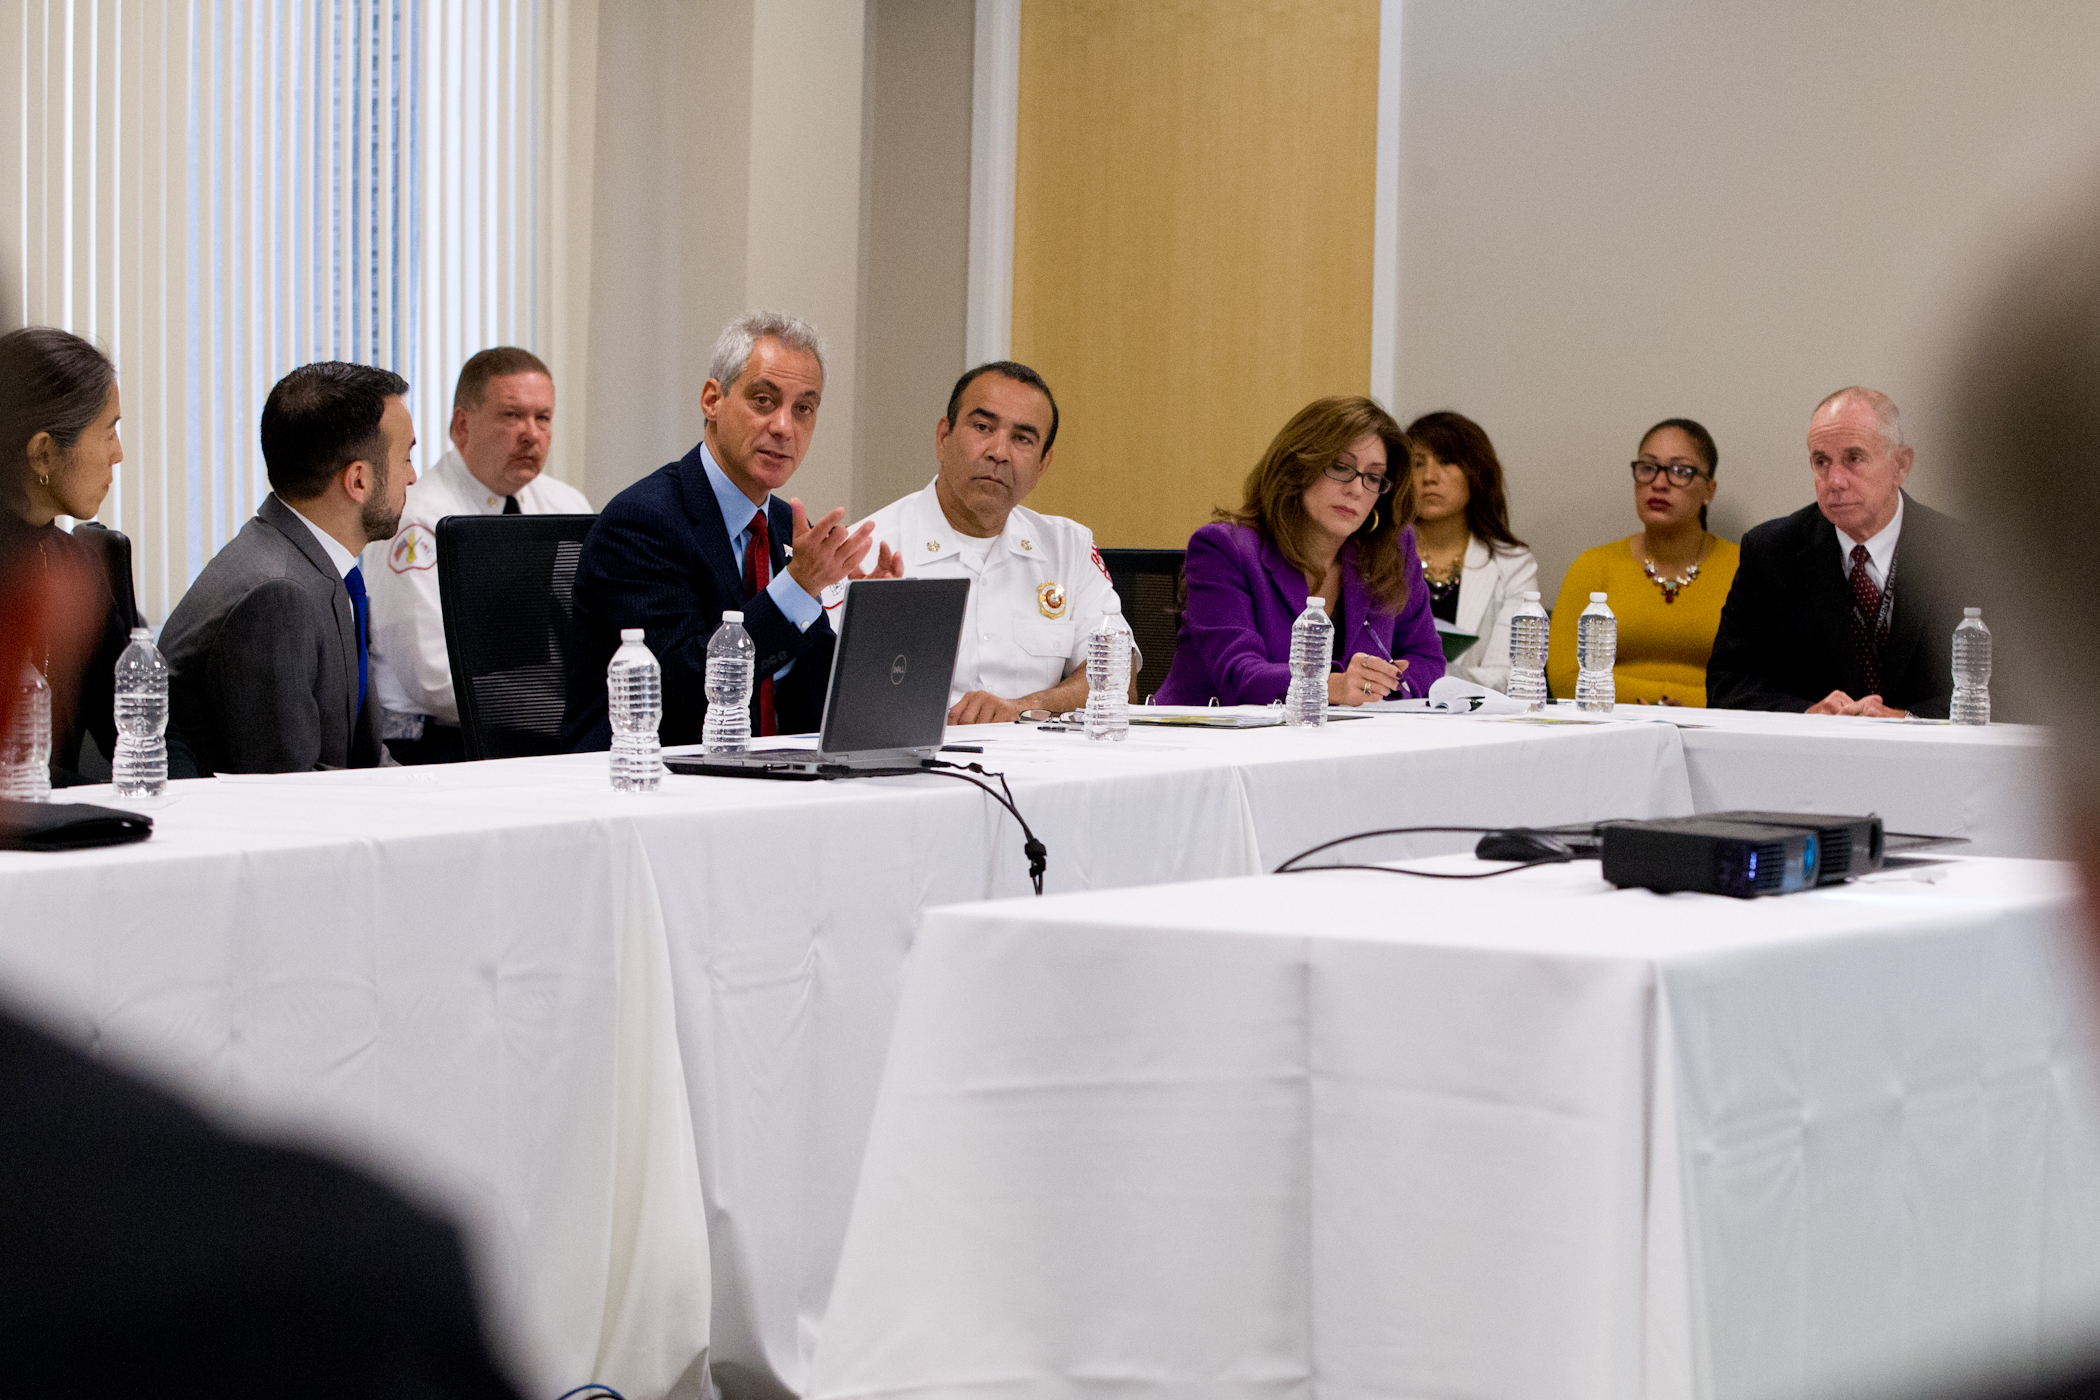 Mayor Emanuel meets with public health officials, cabinet members and hospital leaders on Ebola preparedness.